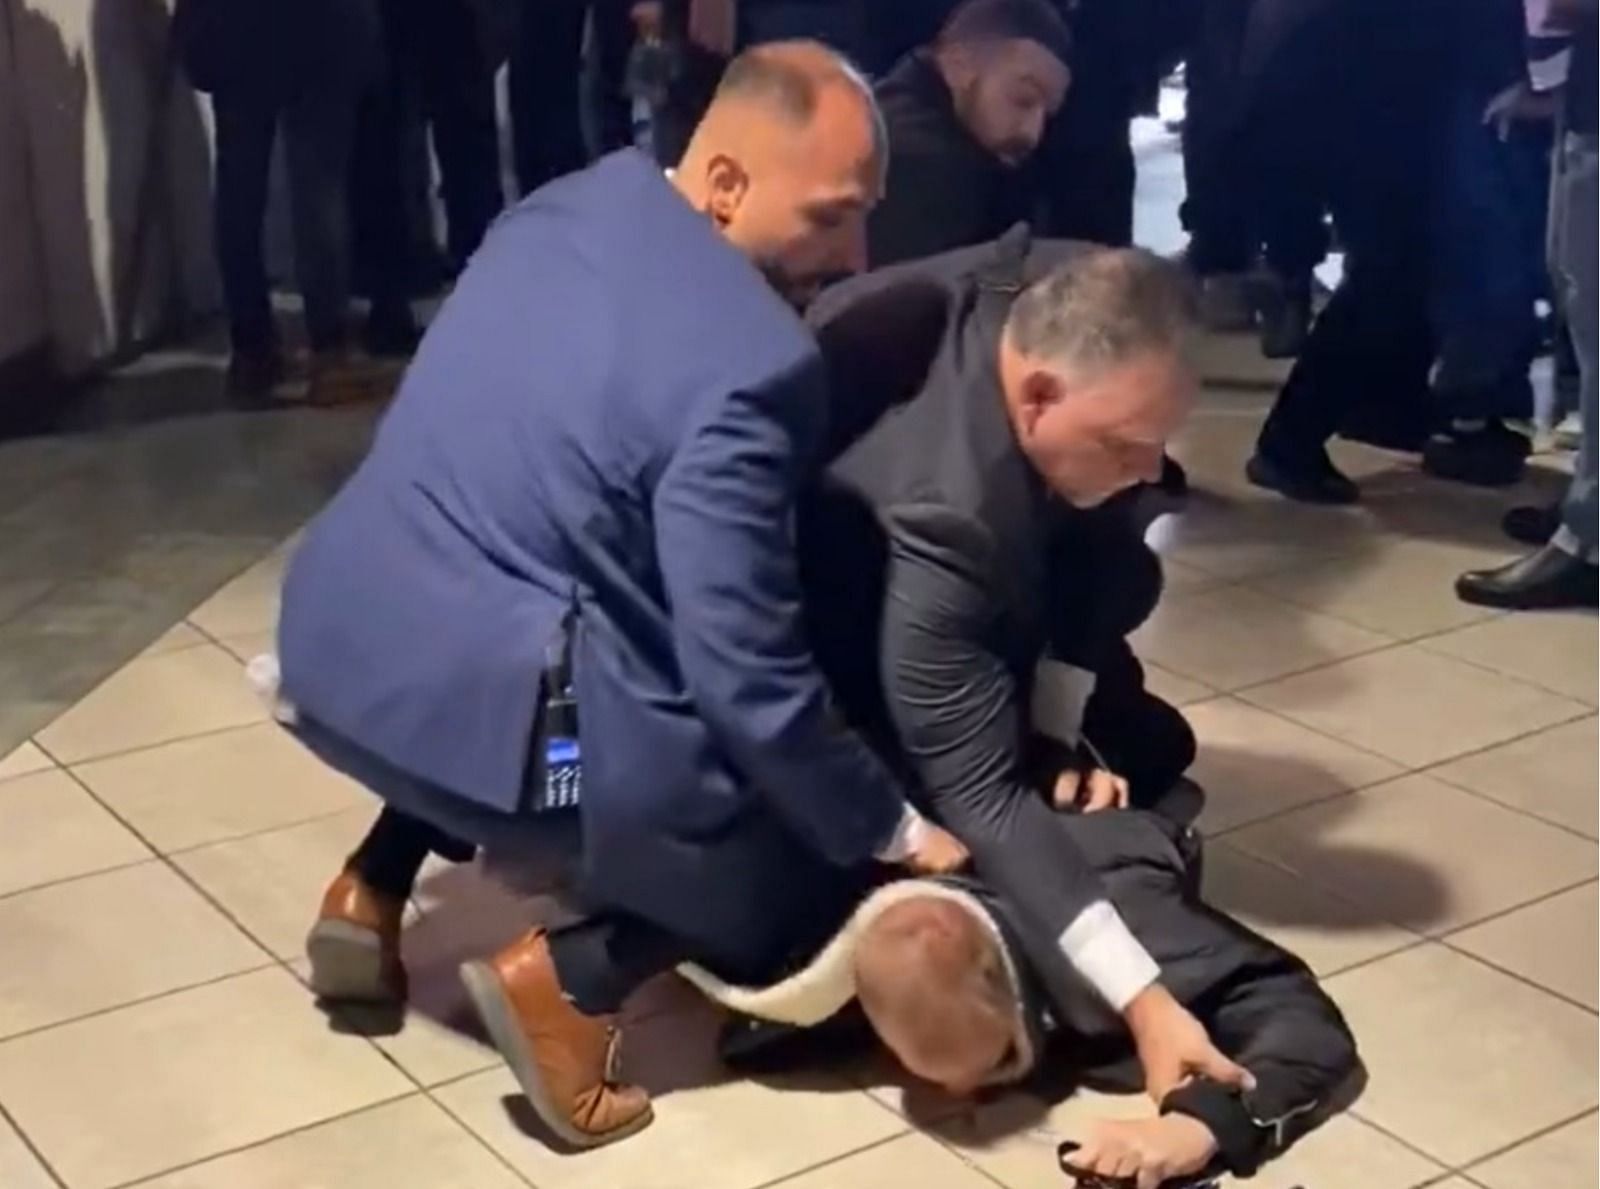 Leafs security guard knees fan on the head, causing MLSE controversy